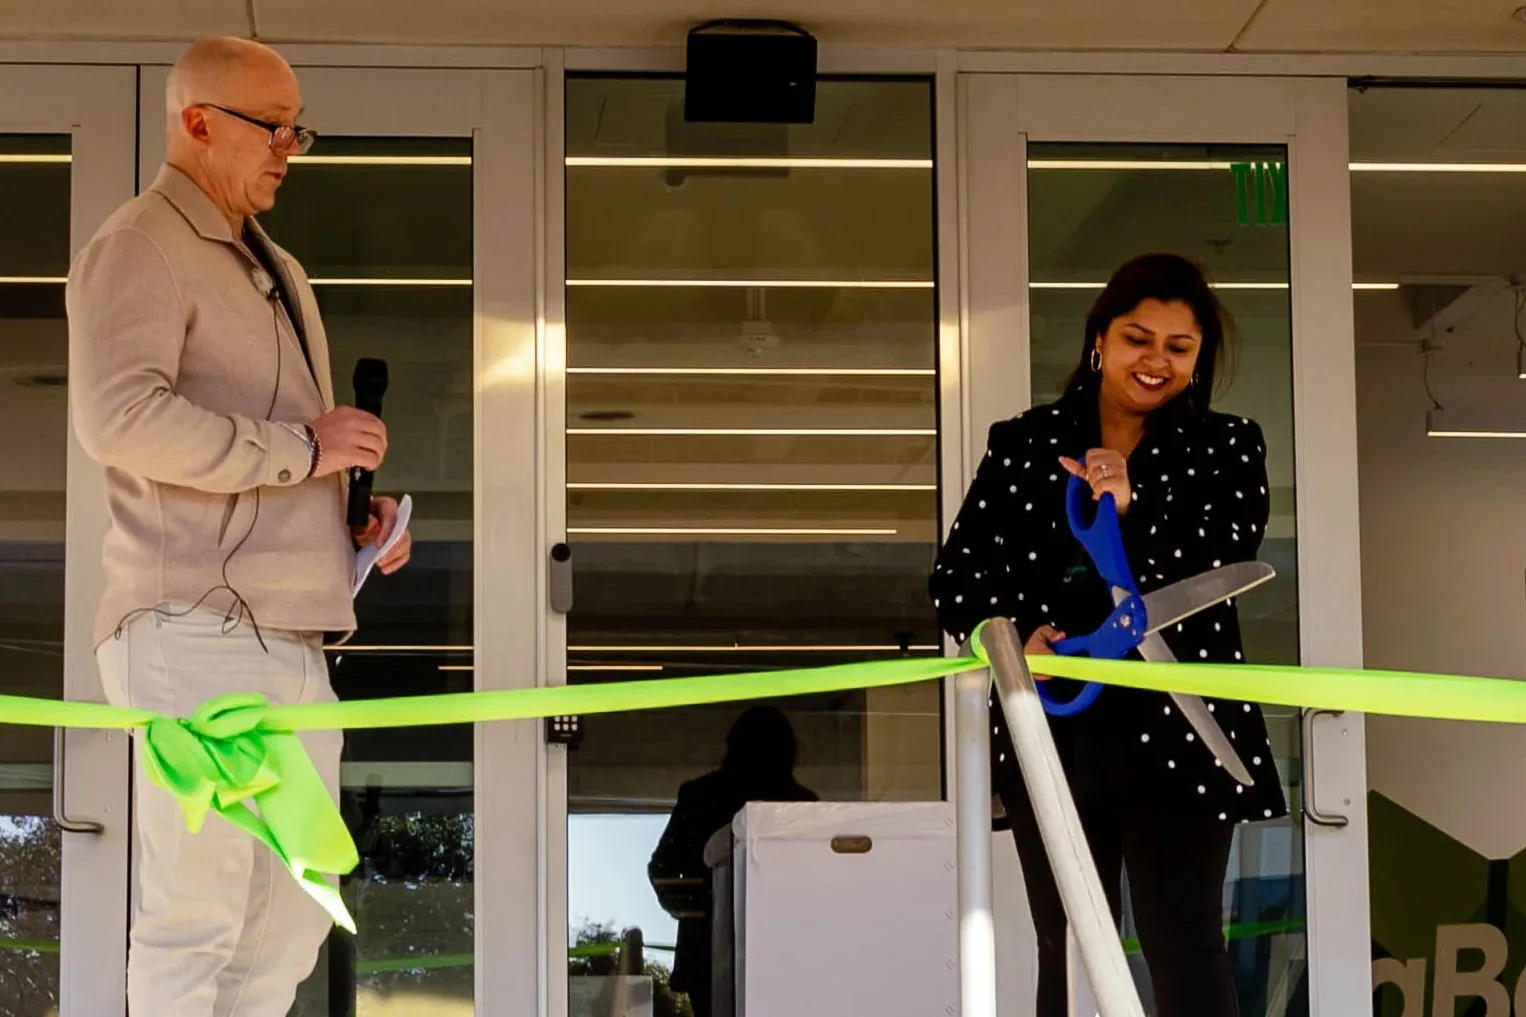 National Home Improvement Services Company DaBella Holds Ribbon-cutting Event to Celebrate Opening of New Headquarters